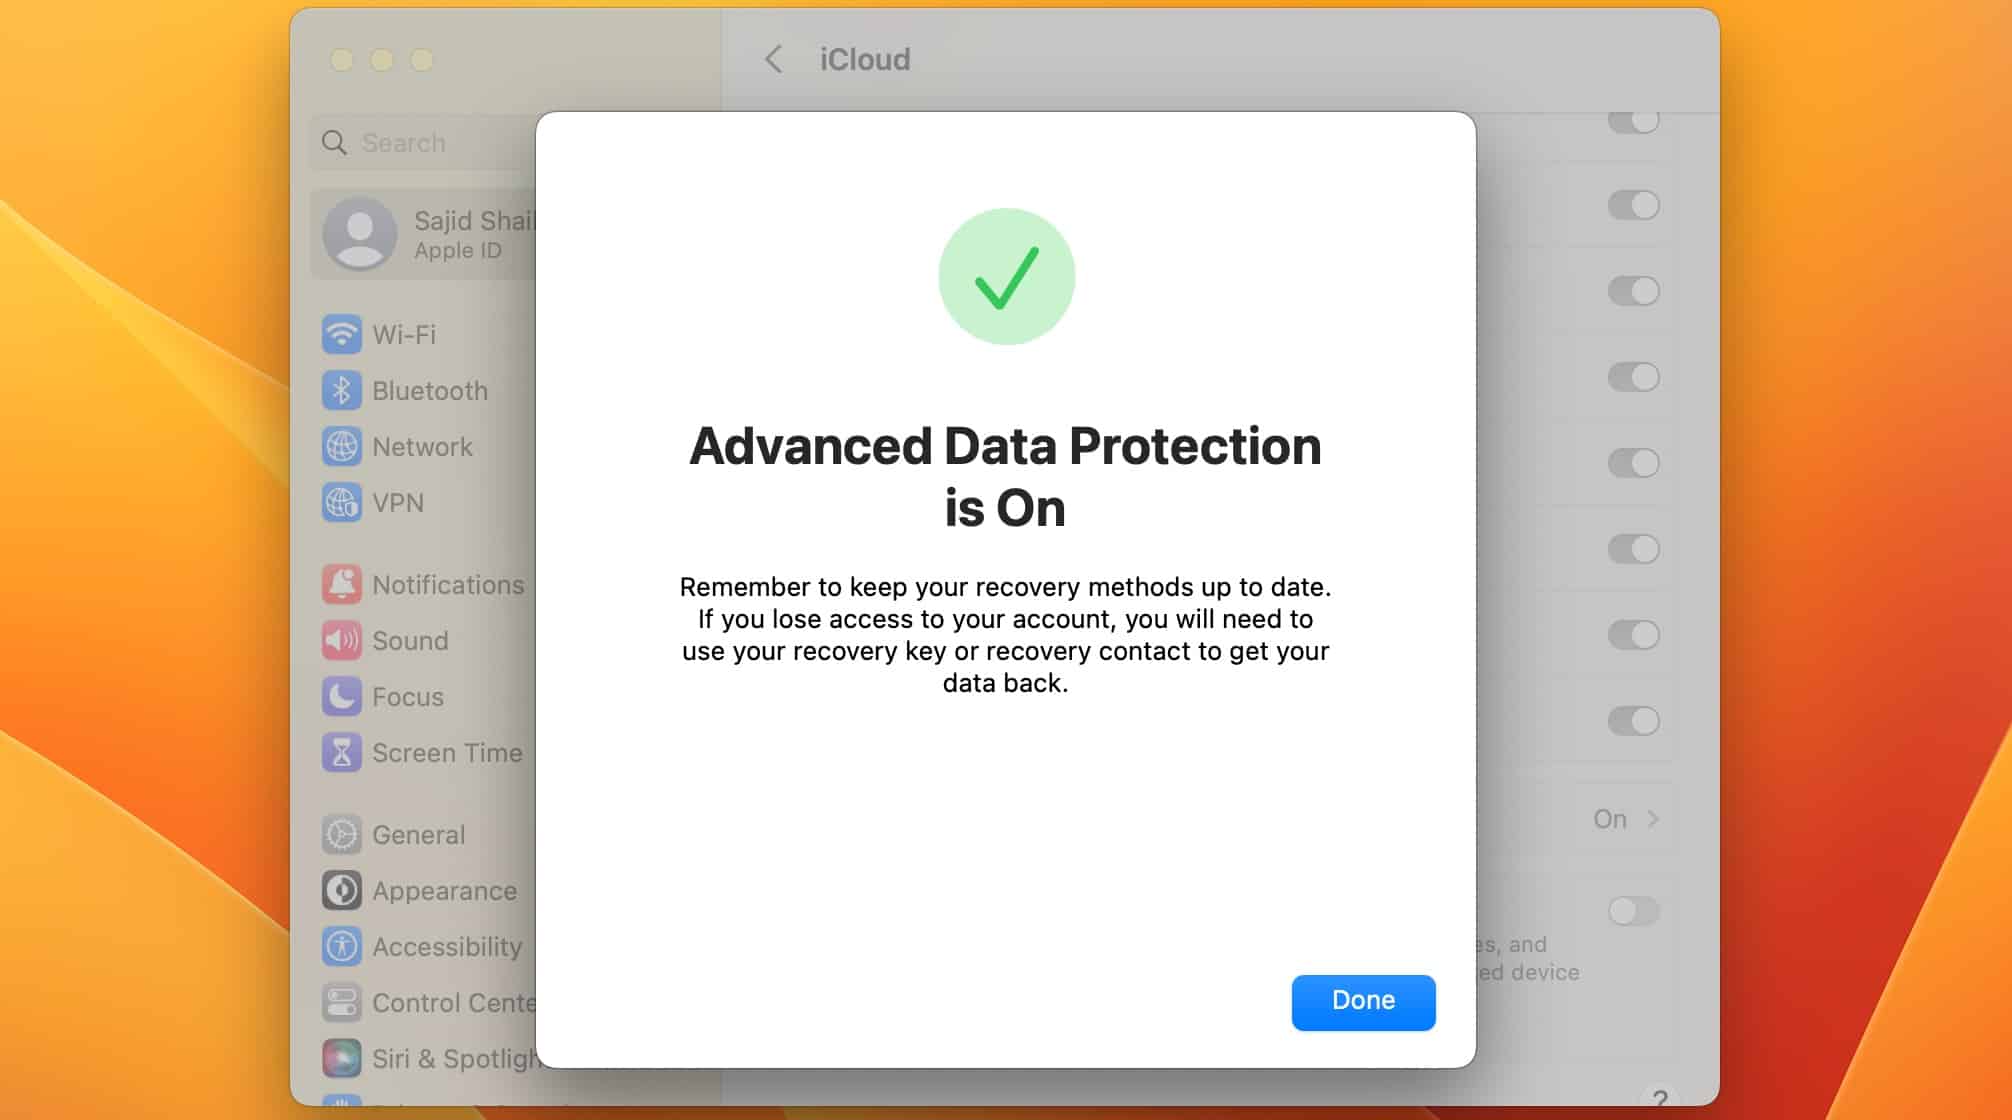 advanced data protection is on message